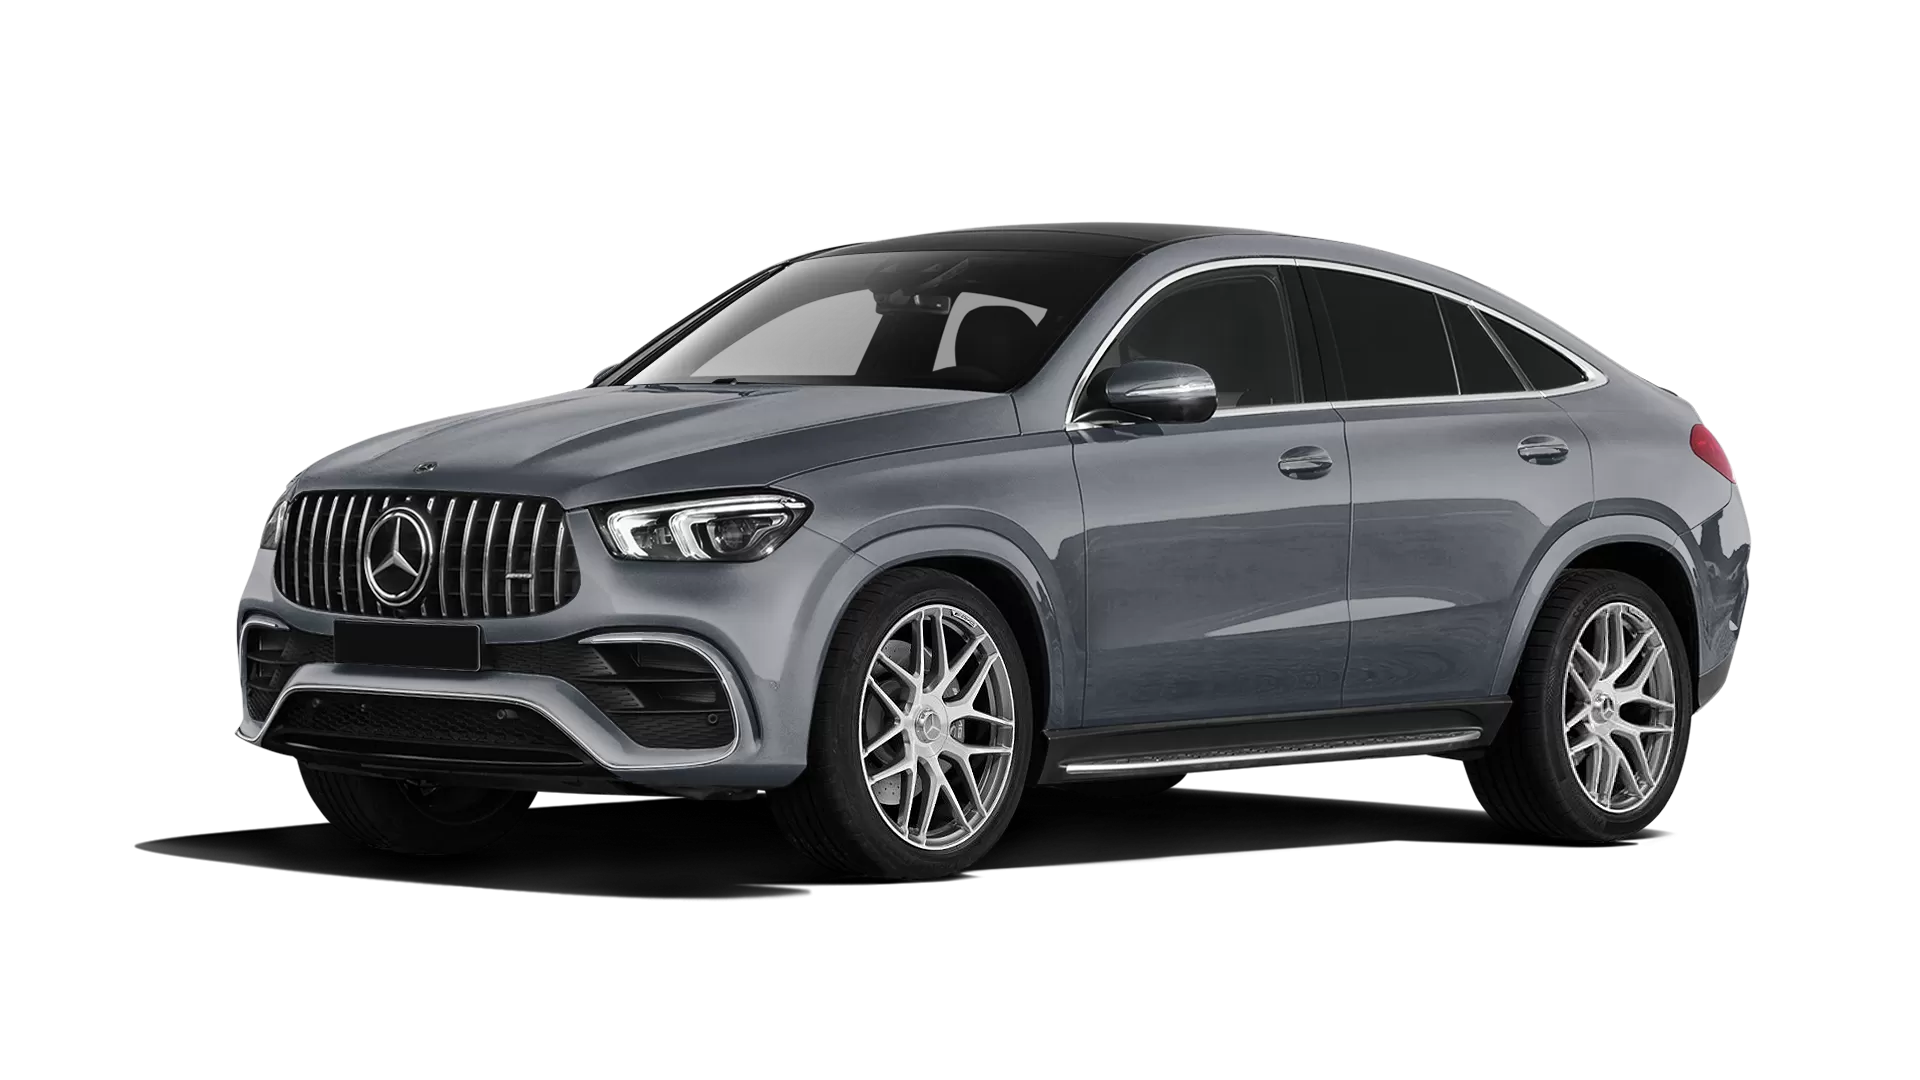 Mercedes GLE Coupe AMG 63 C167 stock front view in Selenite Grey color